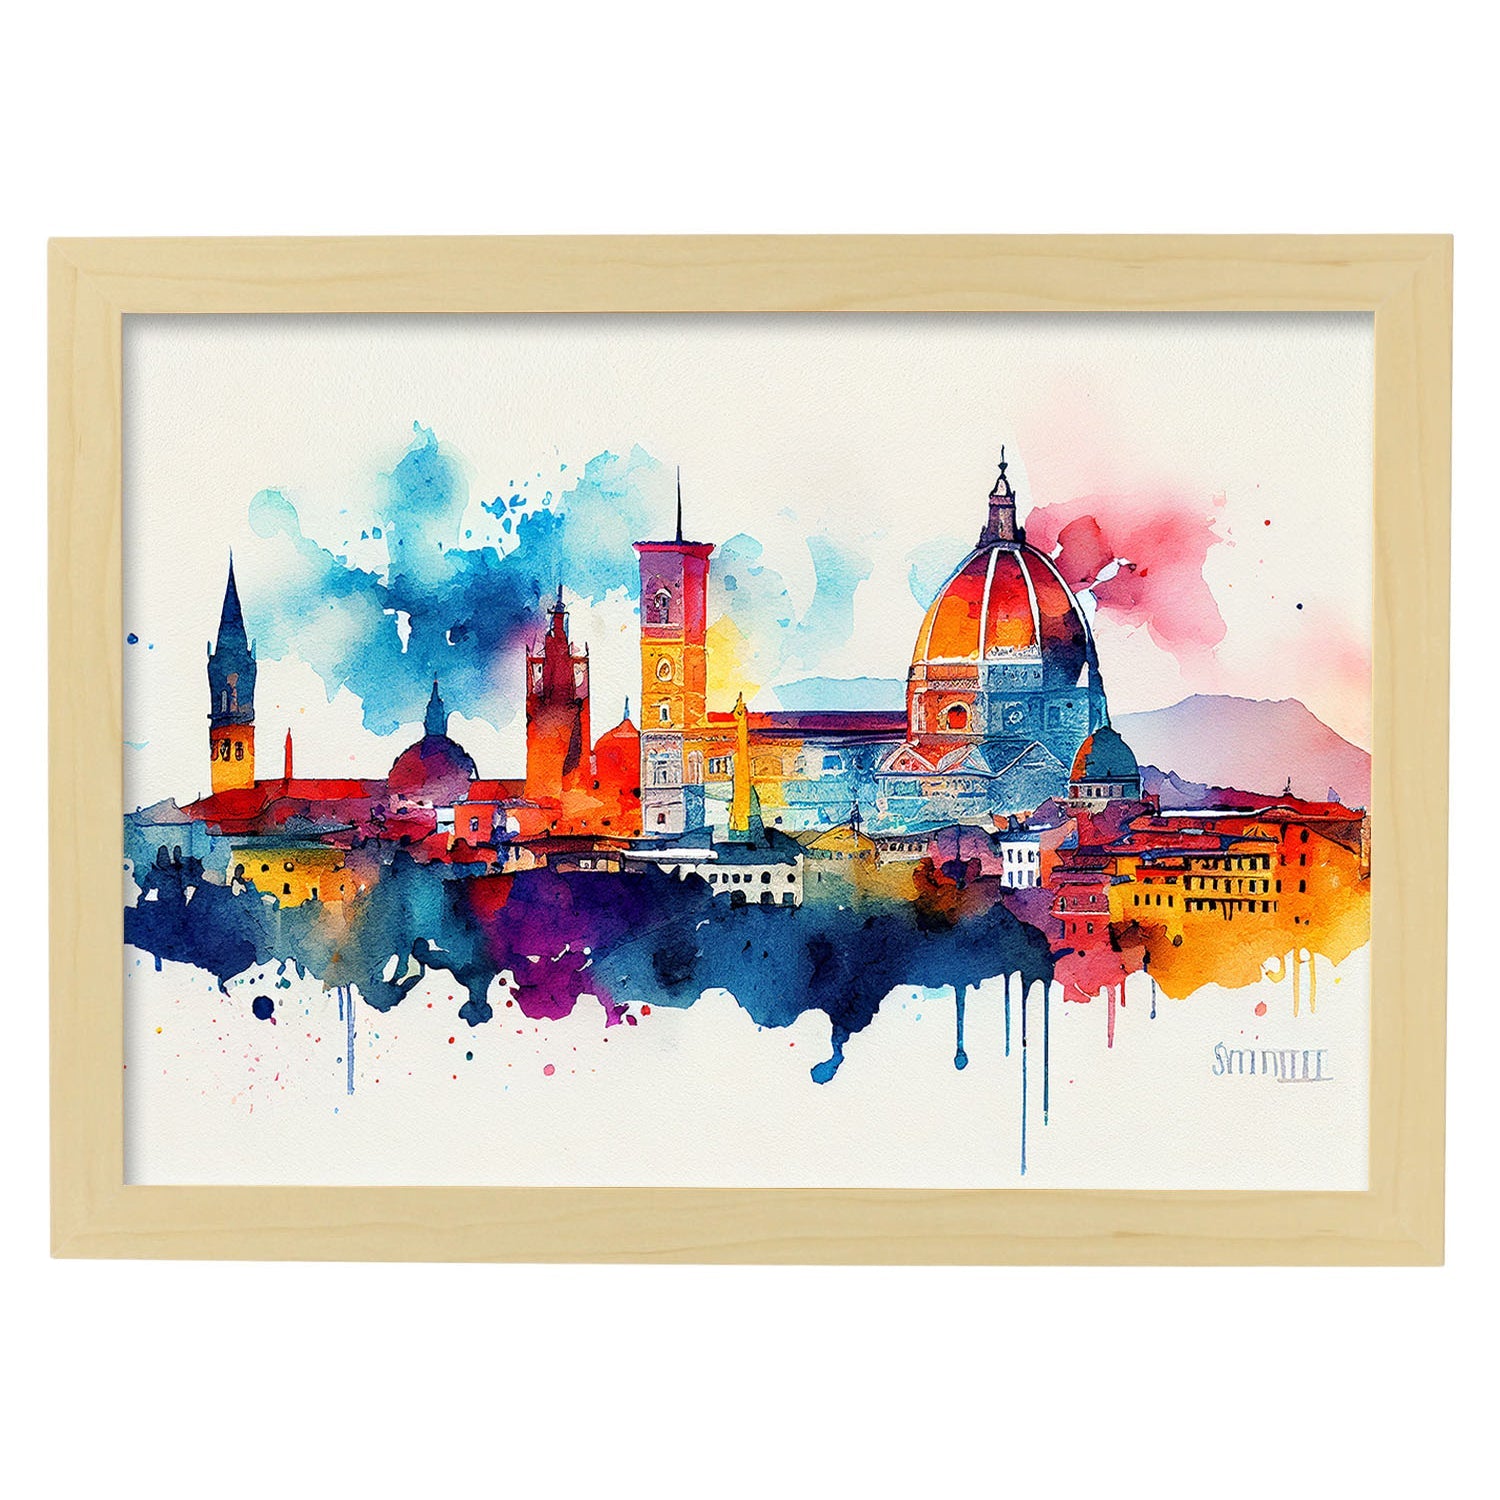 Nacnic watercolor of a skyline of the city of Florence_3. Aesthetic Wall Art Prints for Bedroom or Living Room Design.-Artwork-Nacnic-A4-Marco Madera Clara-Nacnic Estudio SL